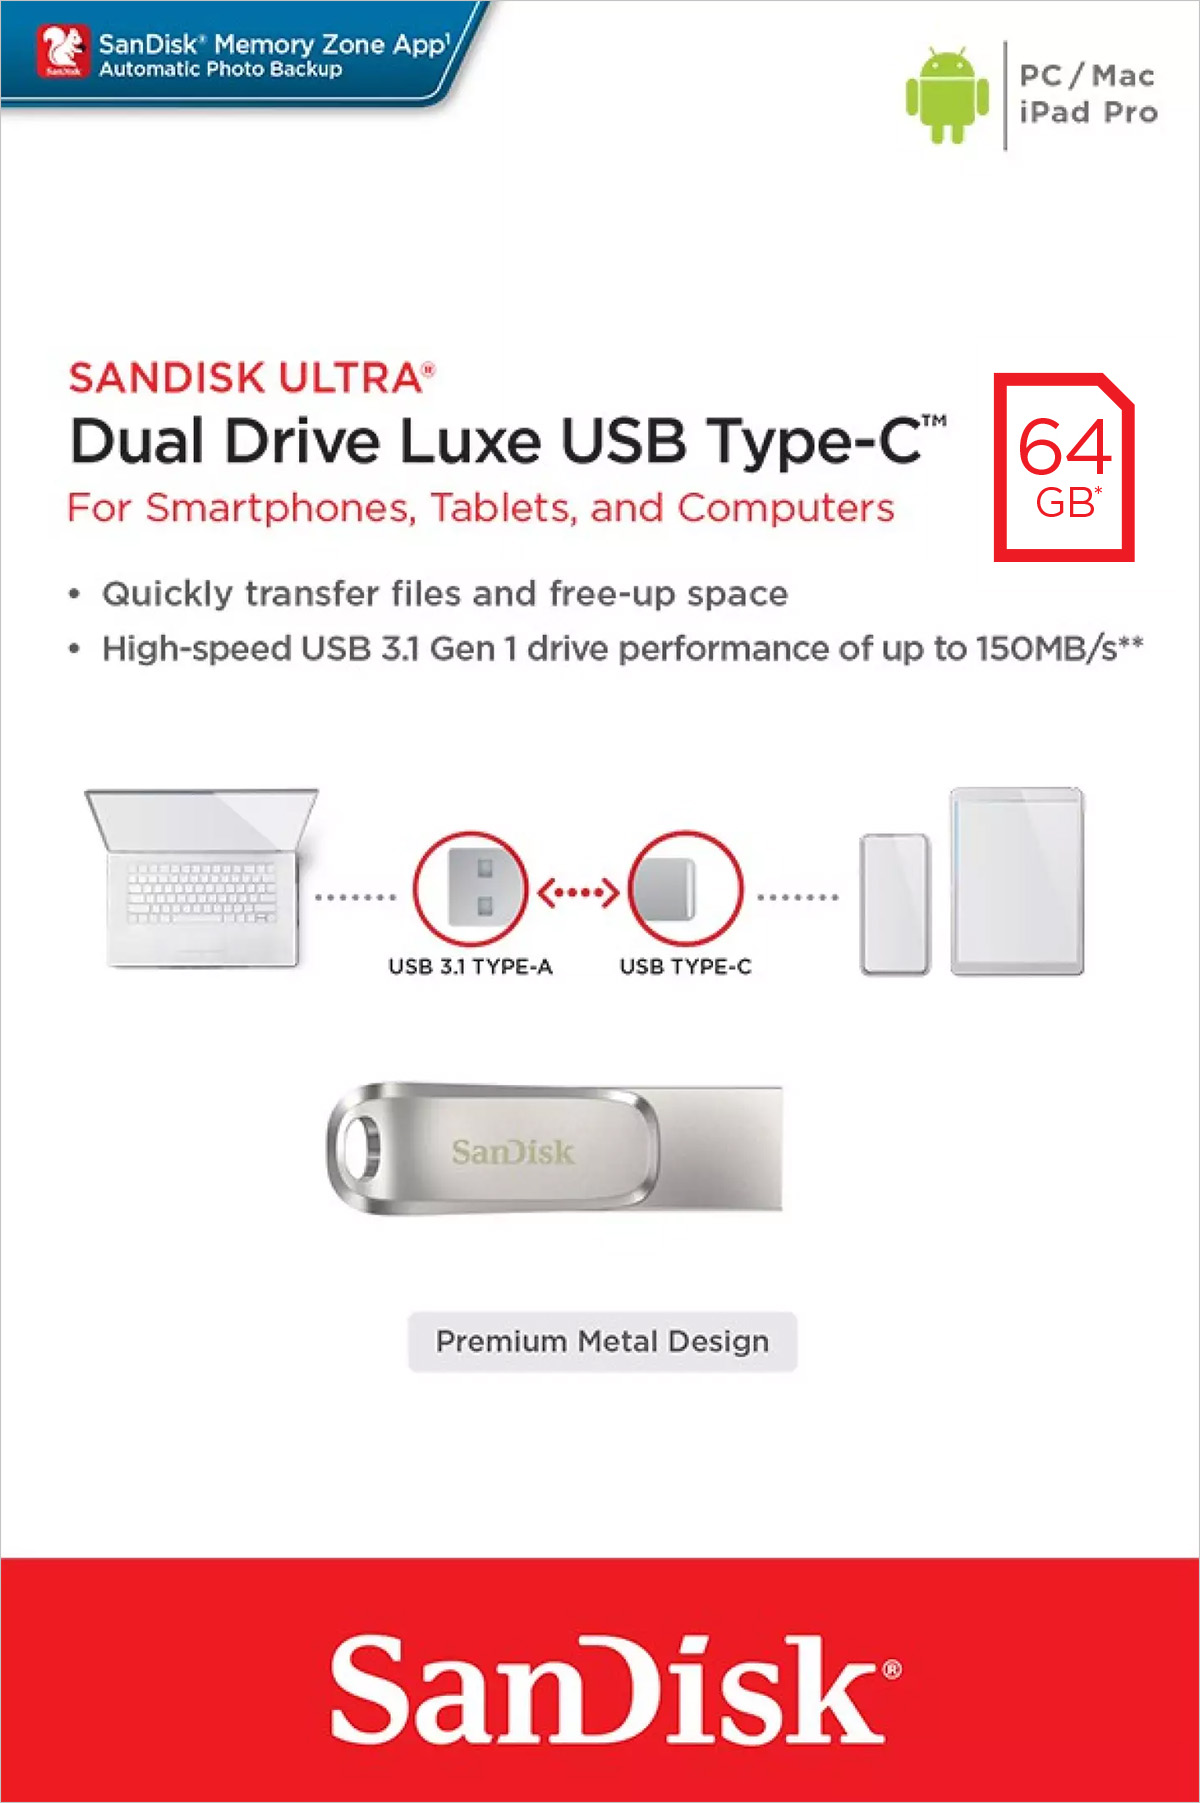 Sandisk USB 3.1 OTG Stick 64GB, Dual Drive Luxe Typ-A-C, (R) 150MB/s, Memory Zone, Retail-Blister